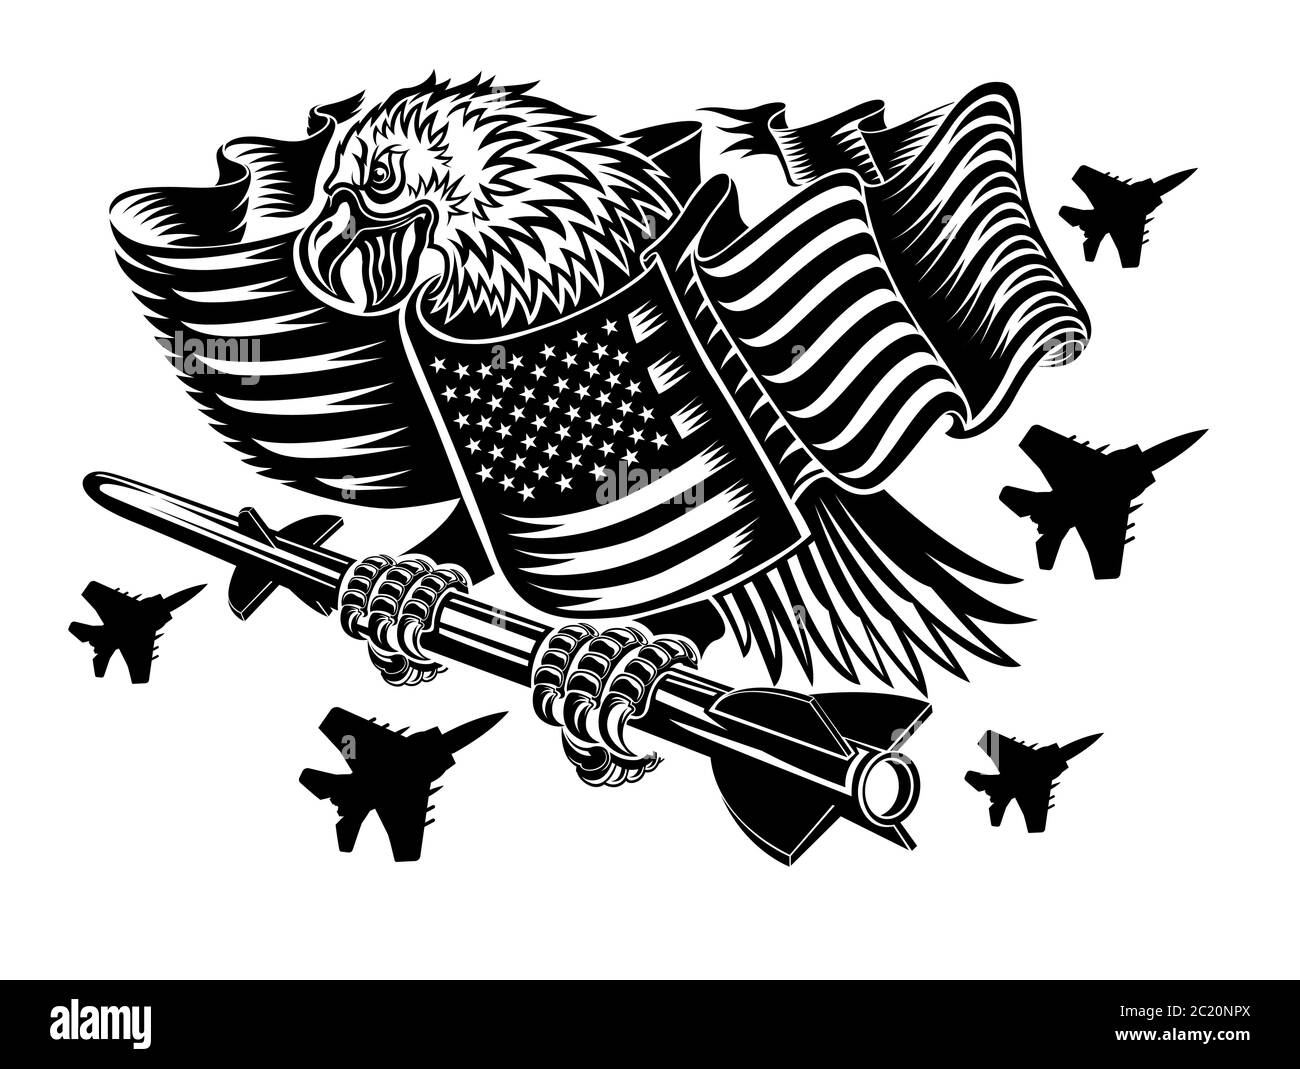 Eagle wrapped up in american flag with reactive missile in his claws. Stock Vector